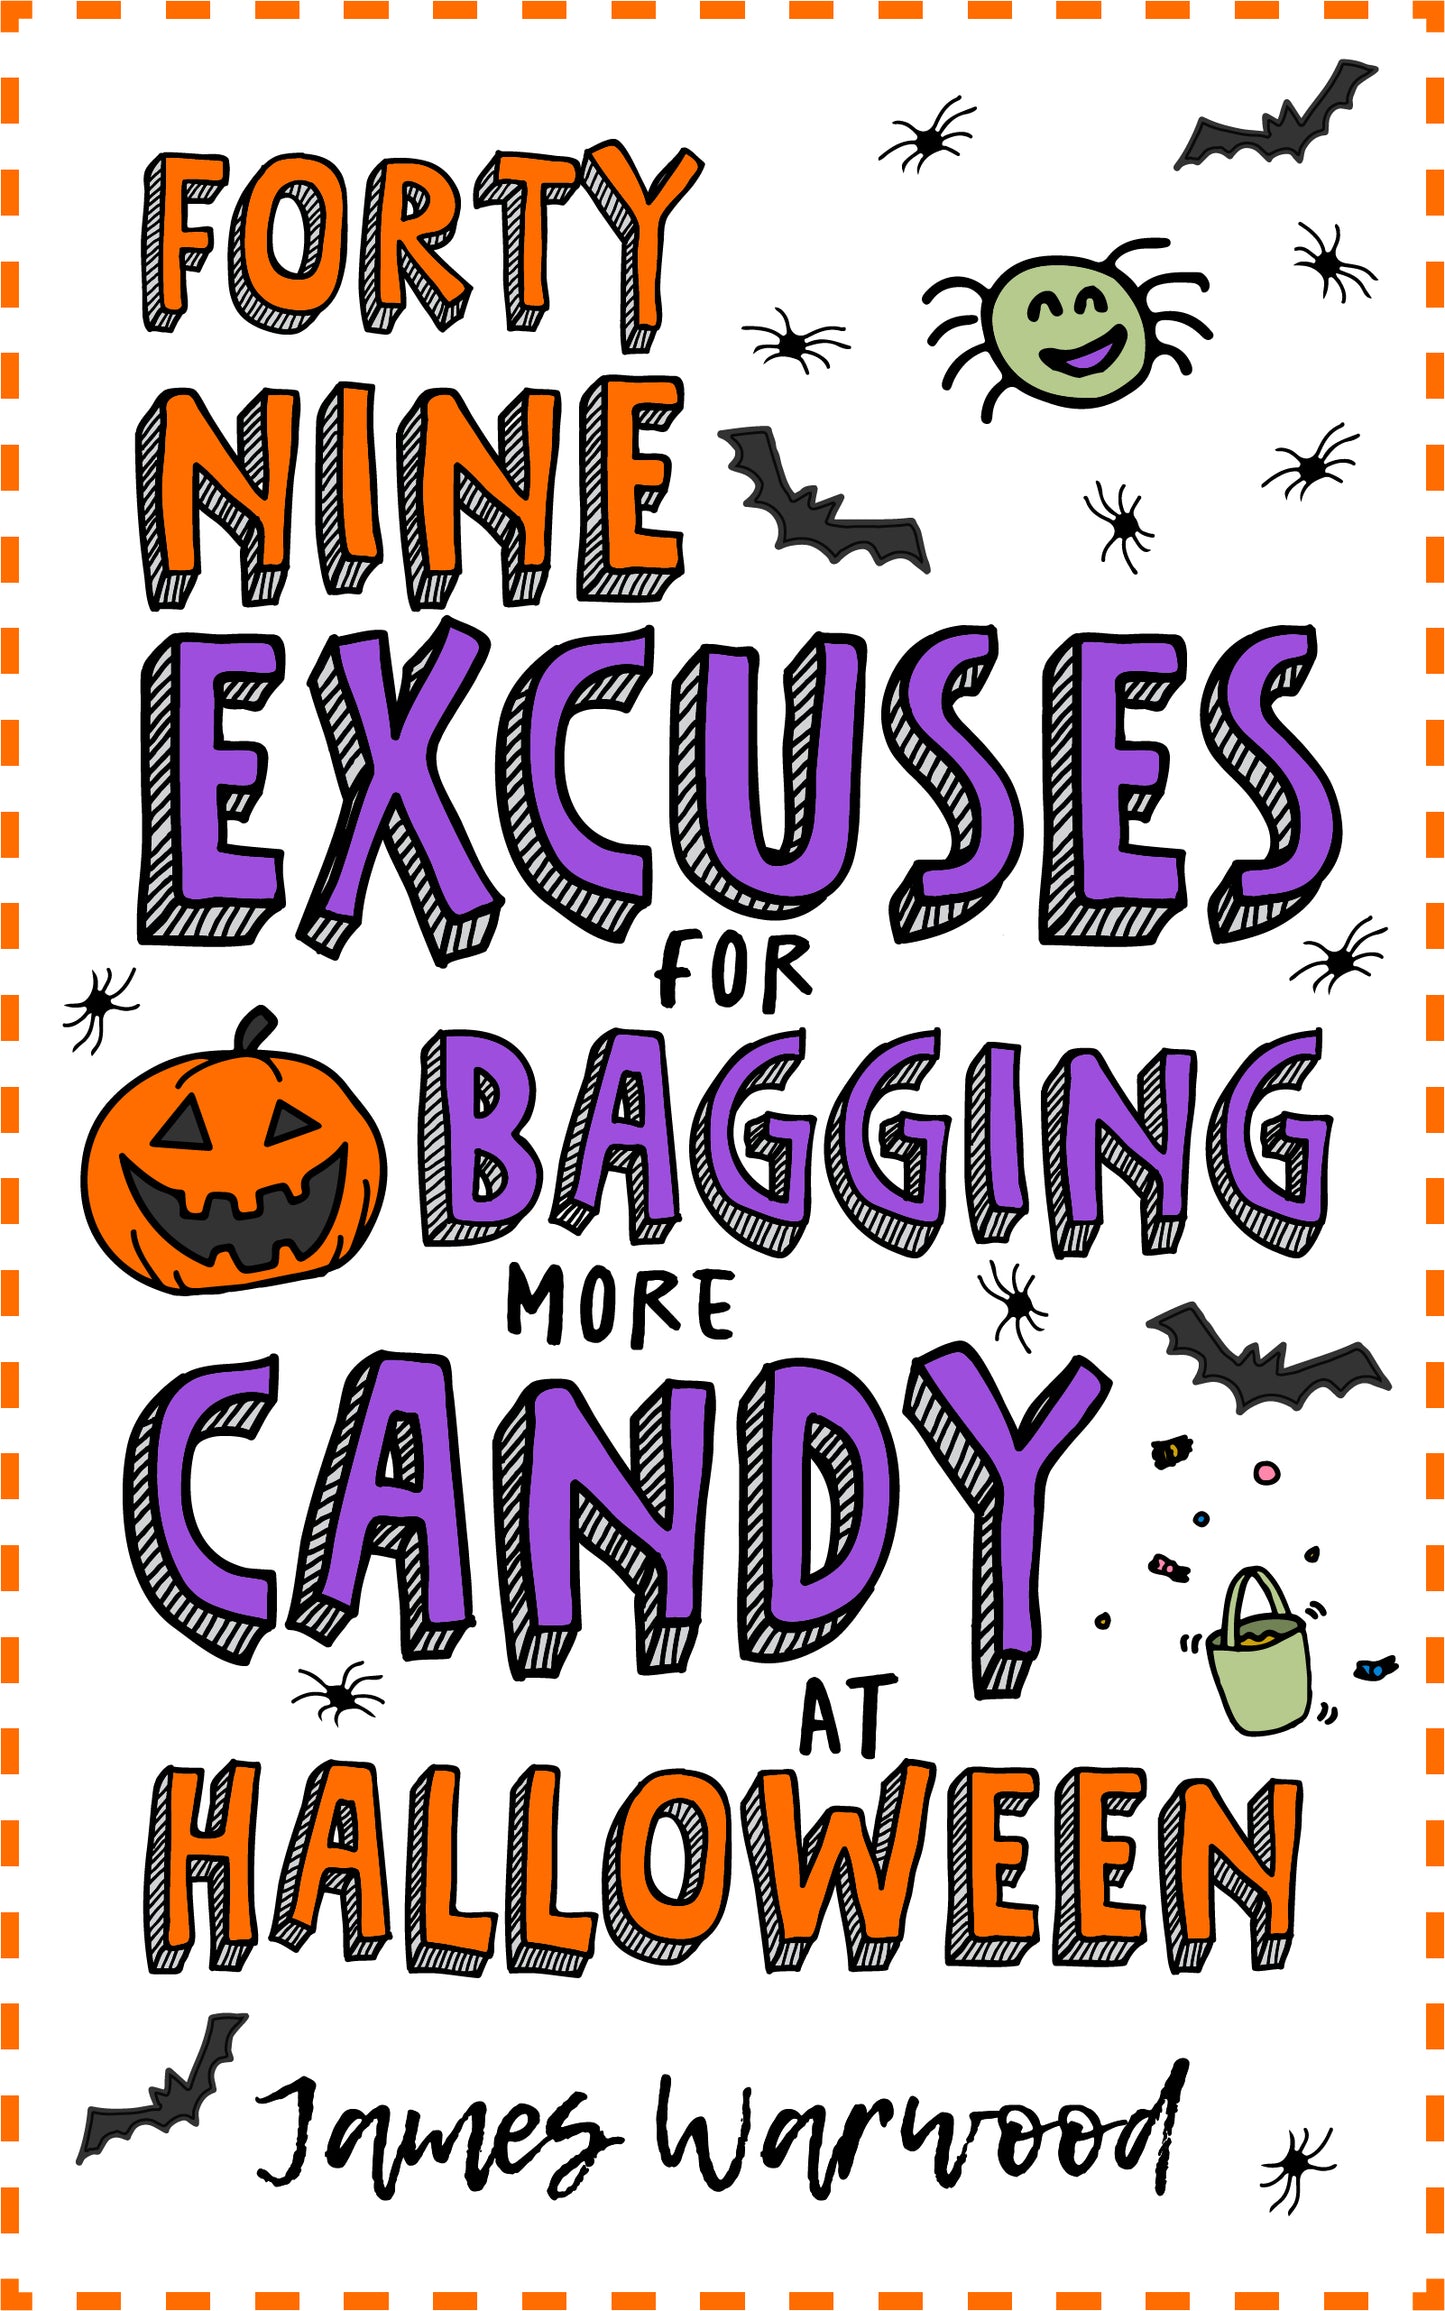 49 Excuses for Bagging More Candy at Halloween